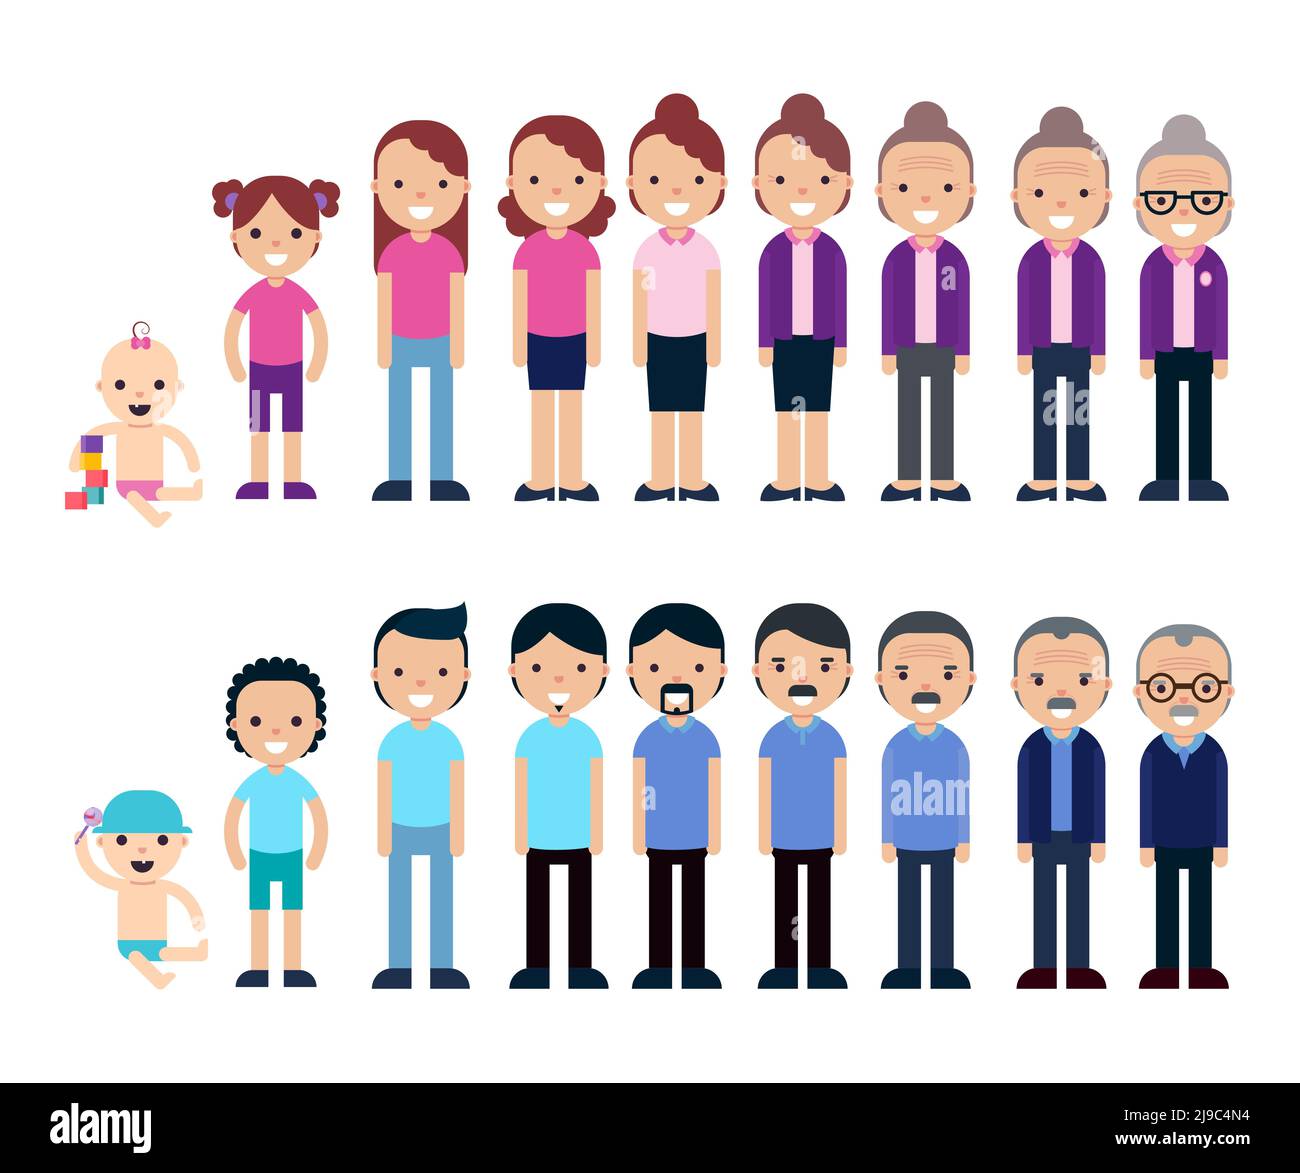 Human Age, Man Growing Up Stages, From Kid To Old, Vectors